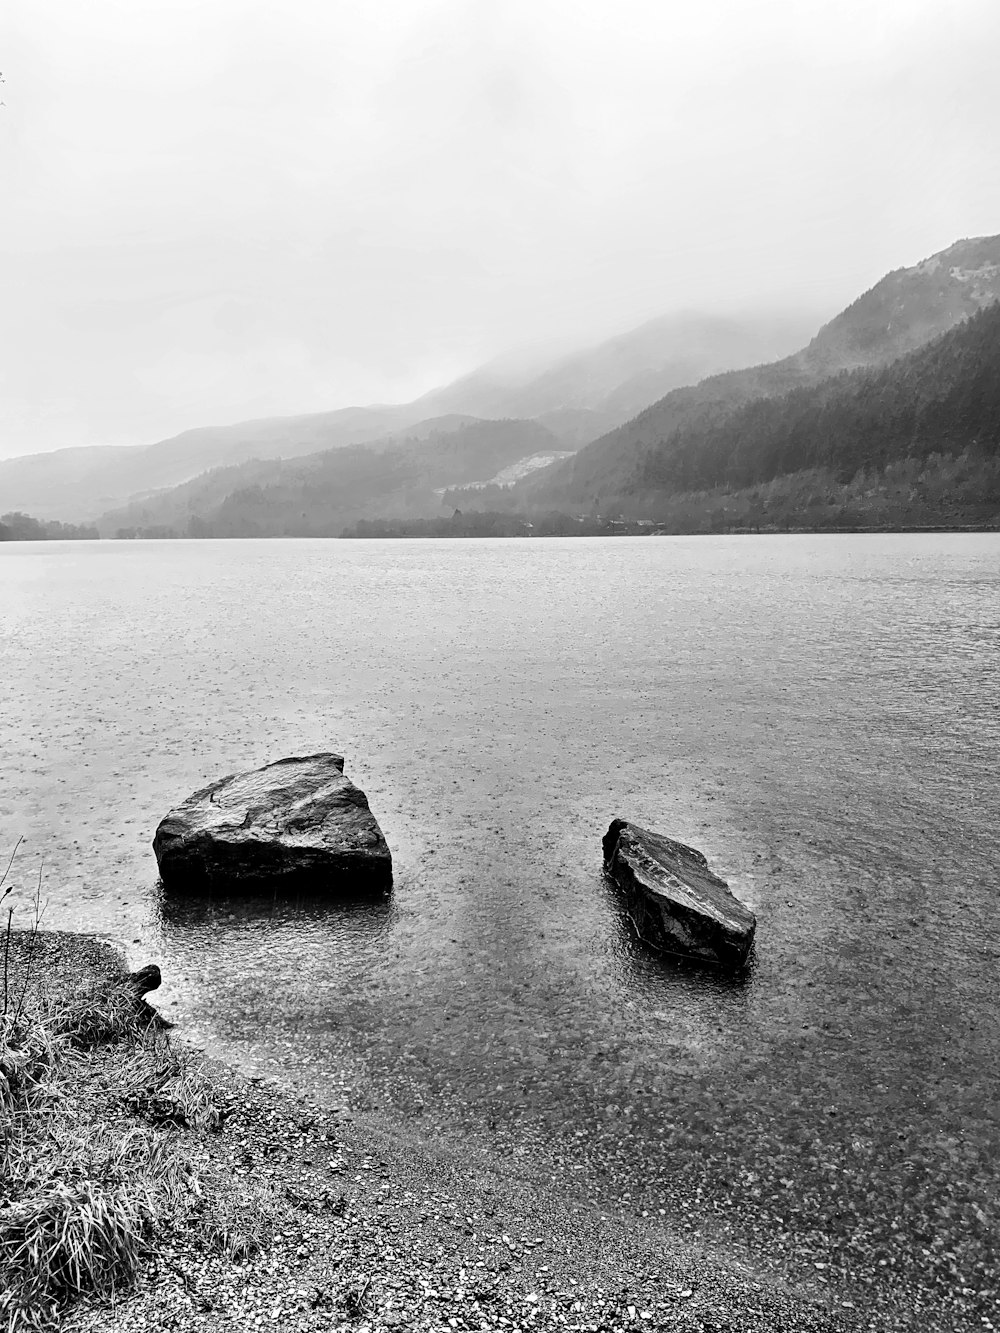 grayscale photo of rock formation on body of water